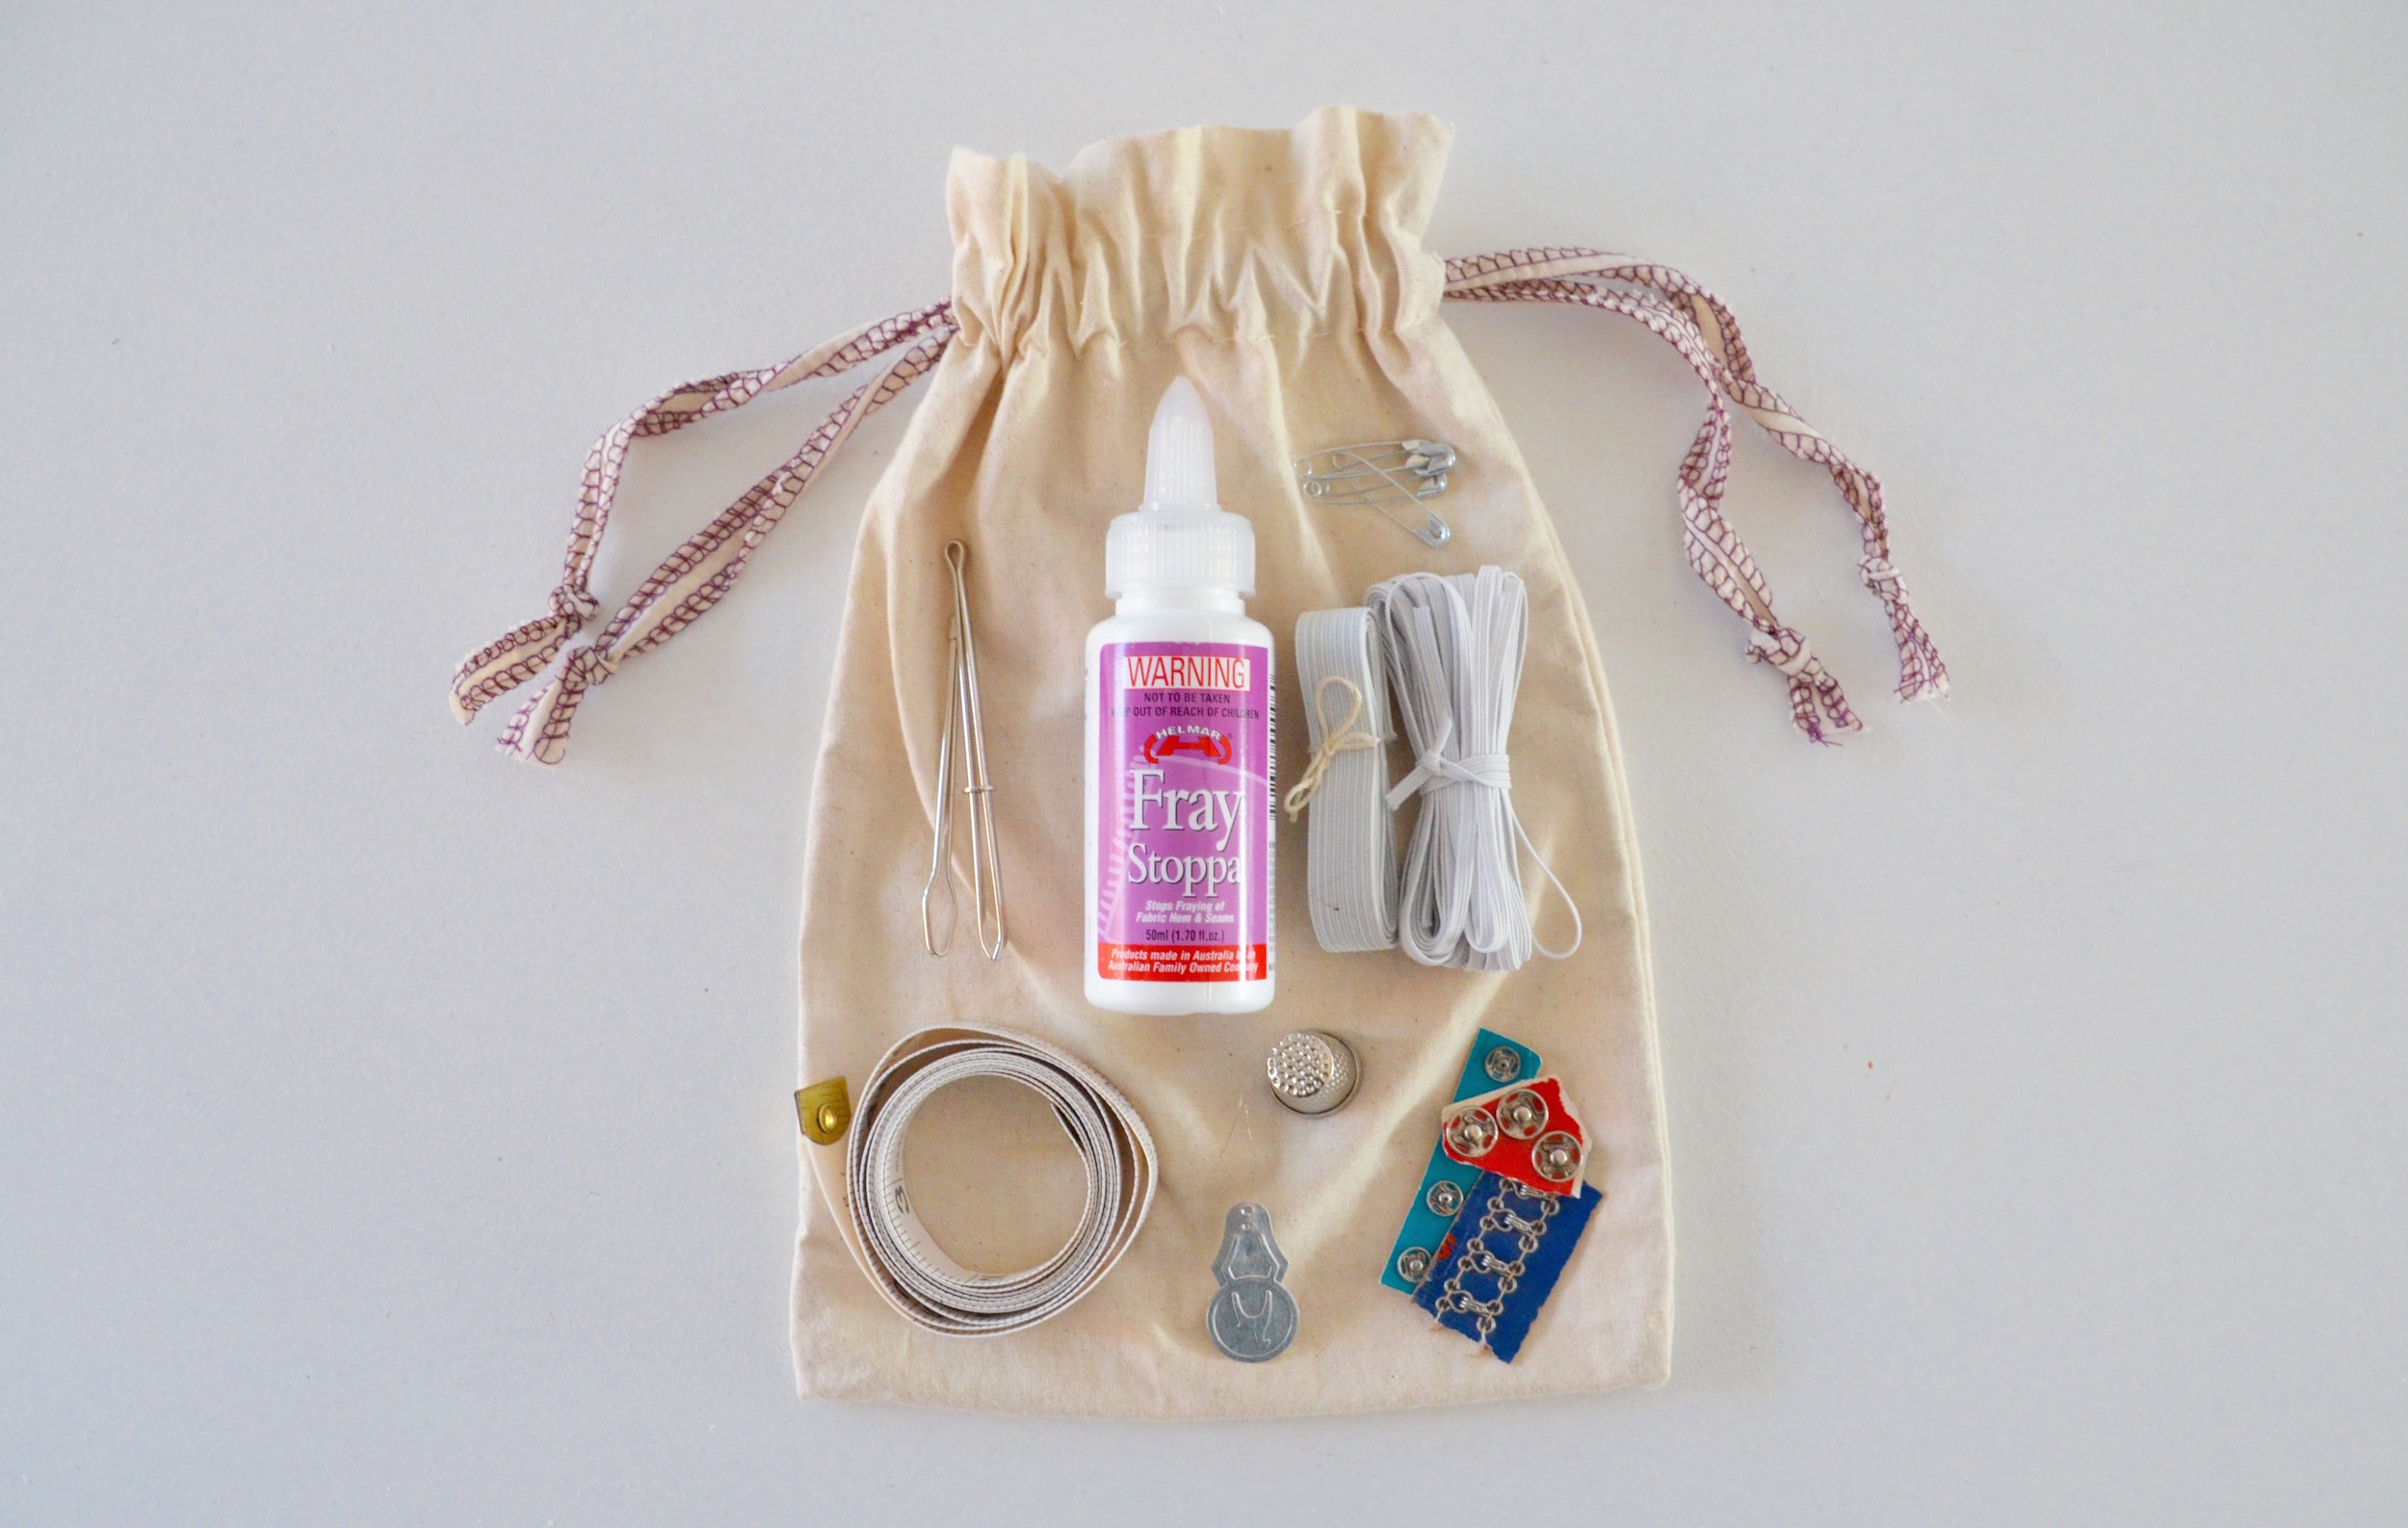 Assemble your own mending first kit for your clothes – small green